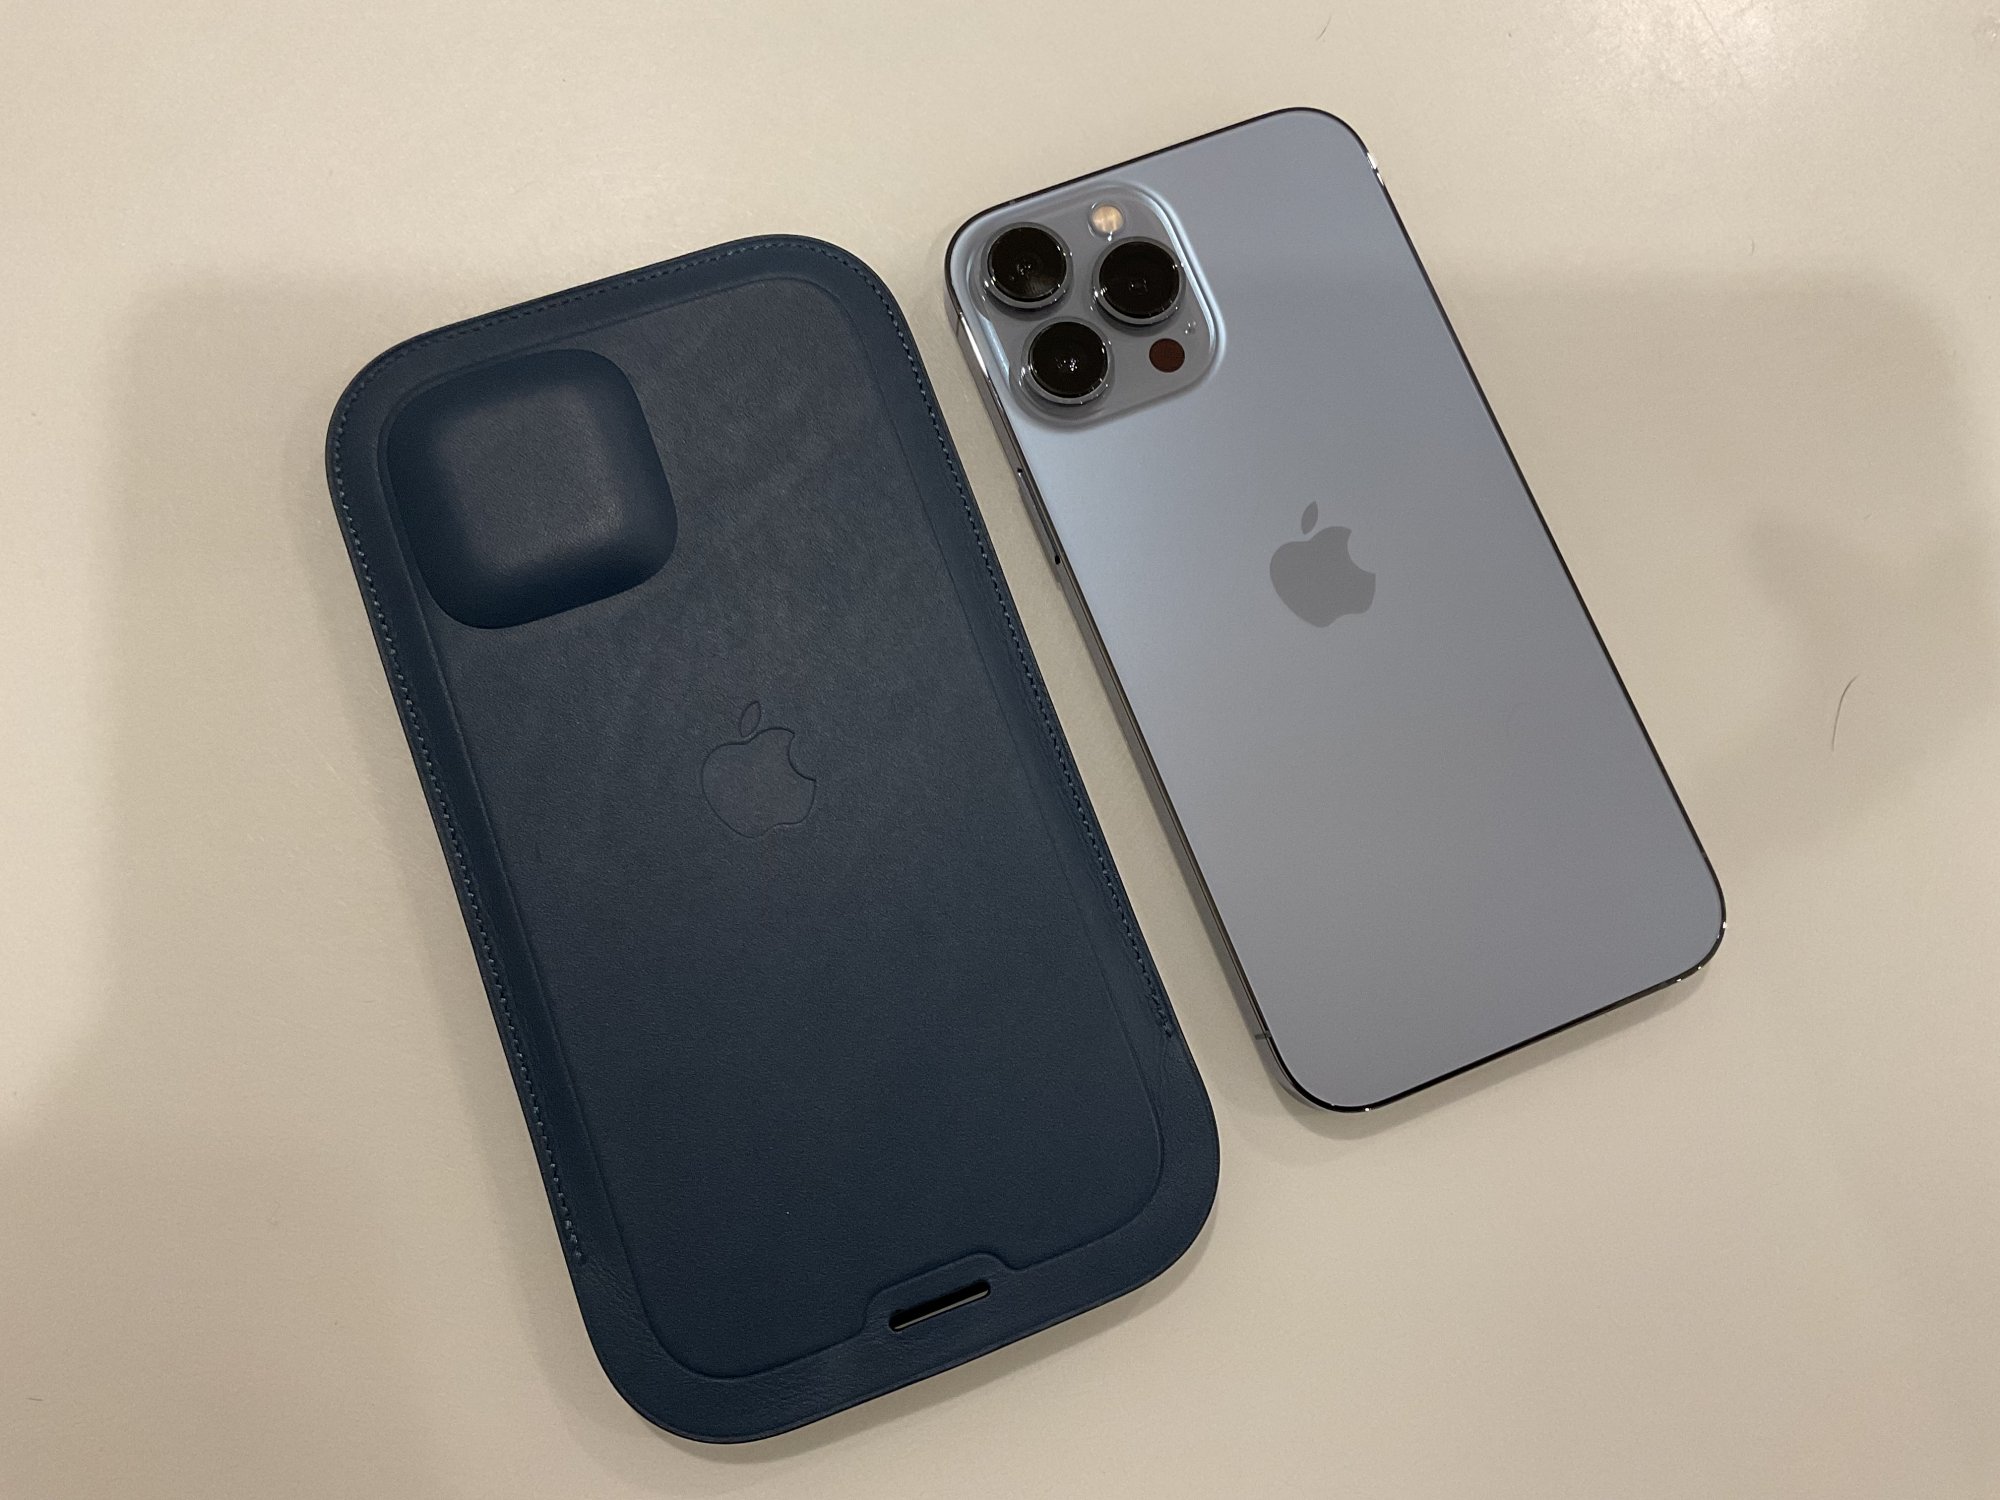 Will an iPhone 11 case fit the iPhone 12?